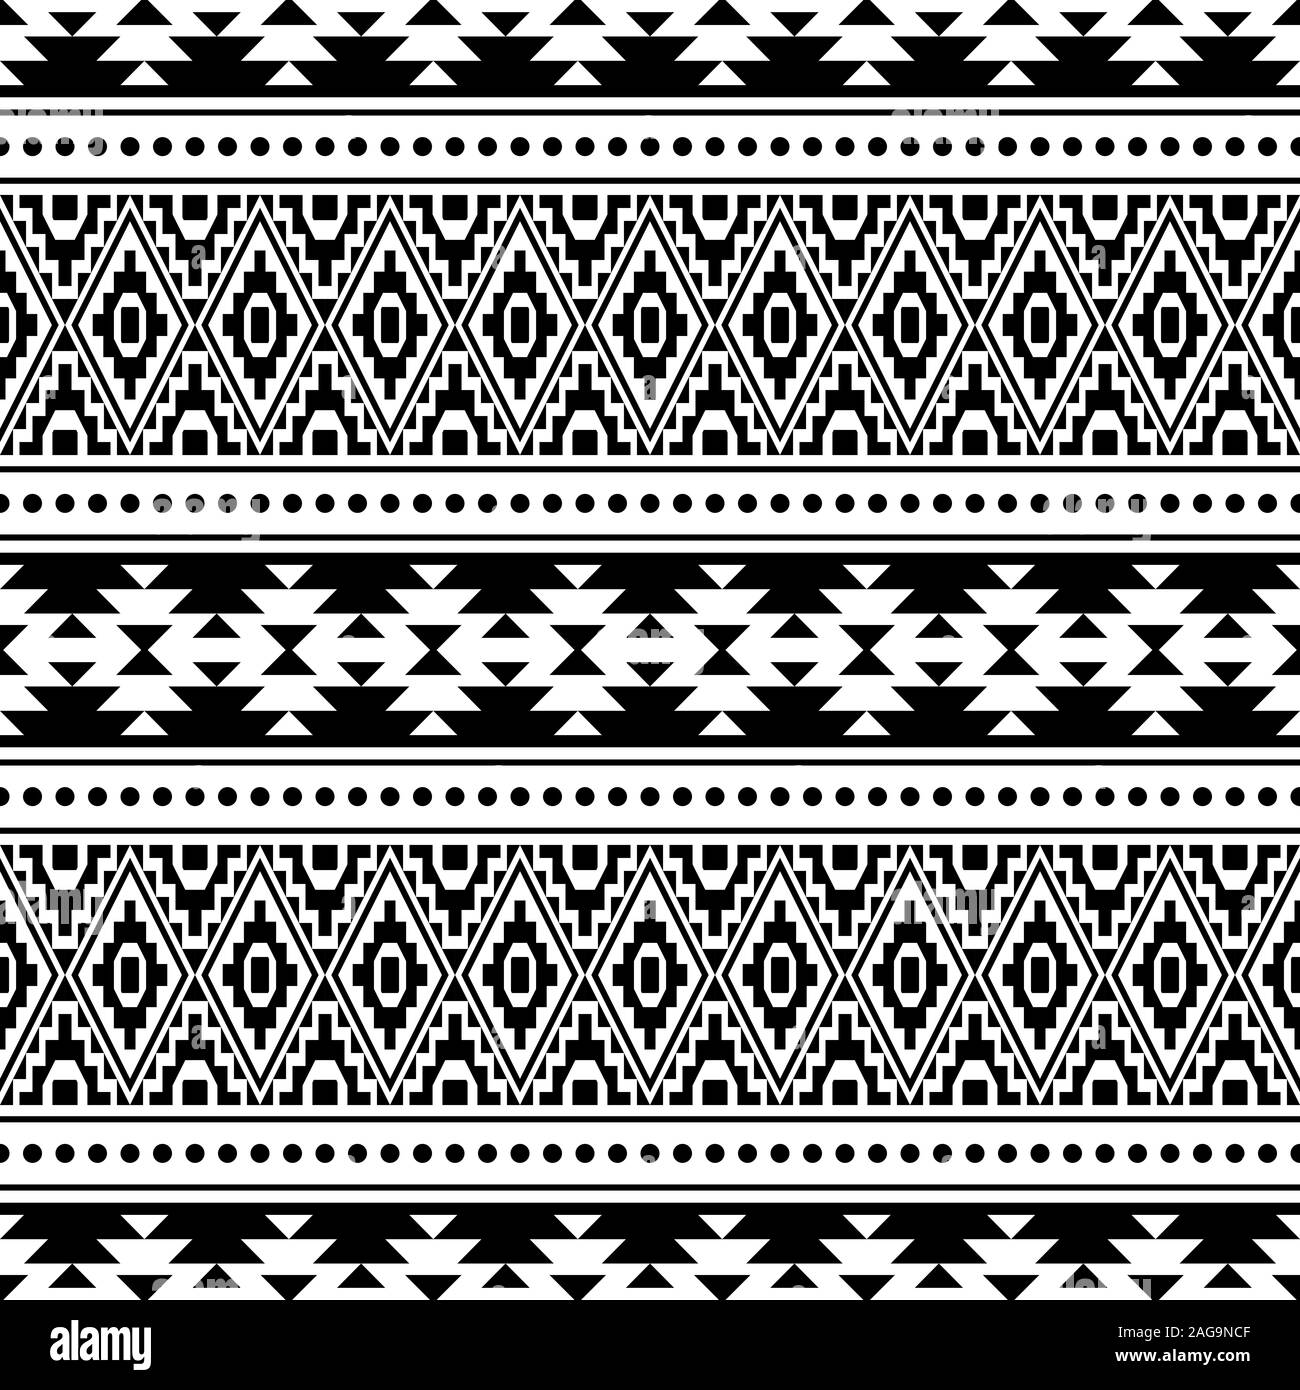 Geometric Persian Ethnic Pattern Illustration design with black and ...